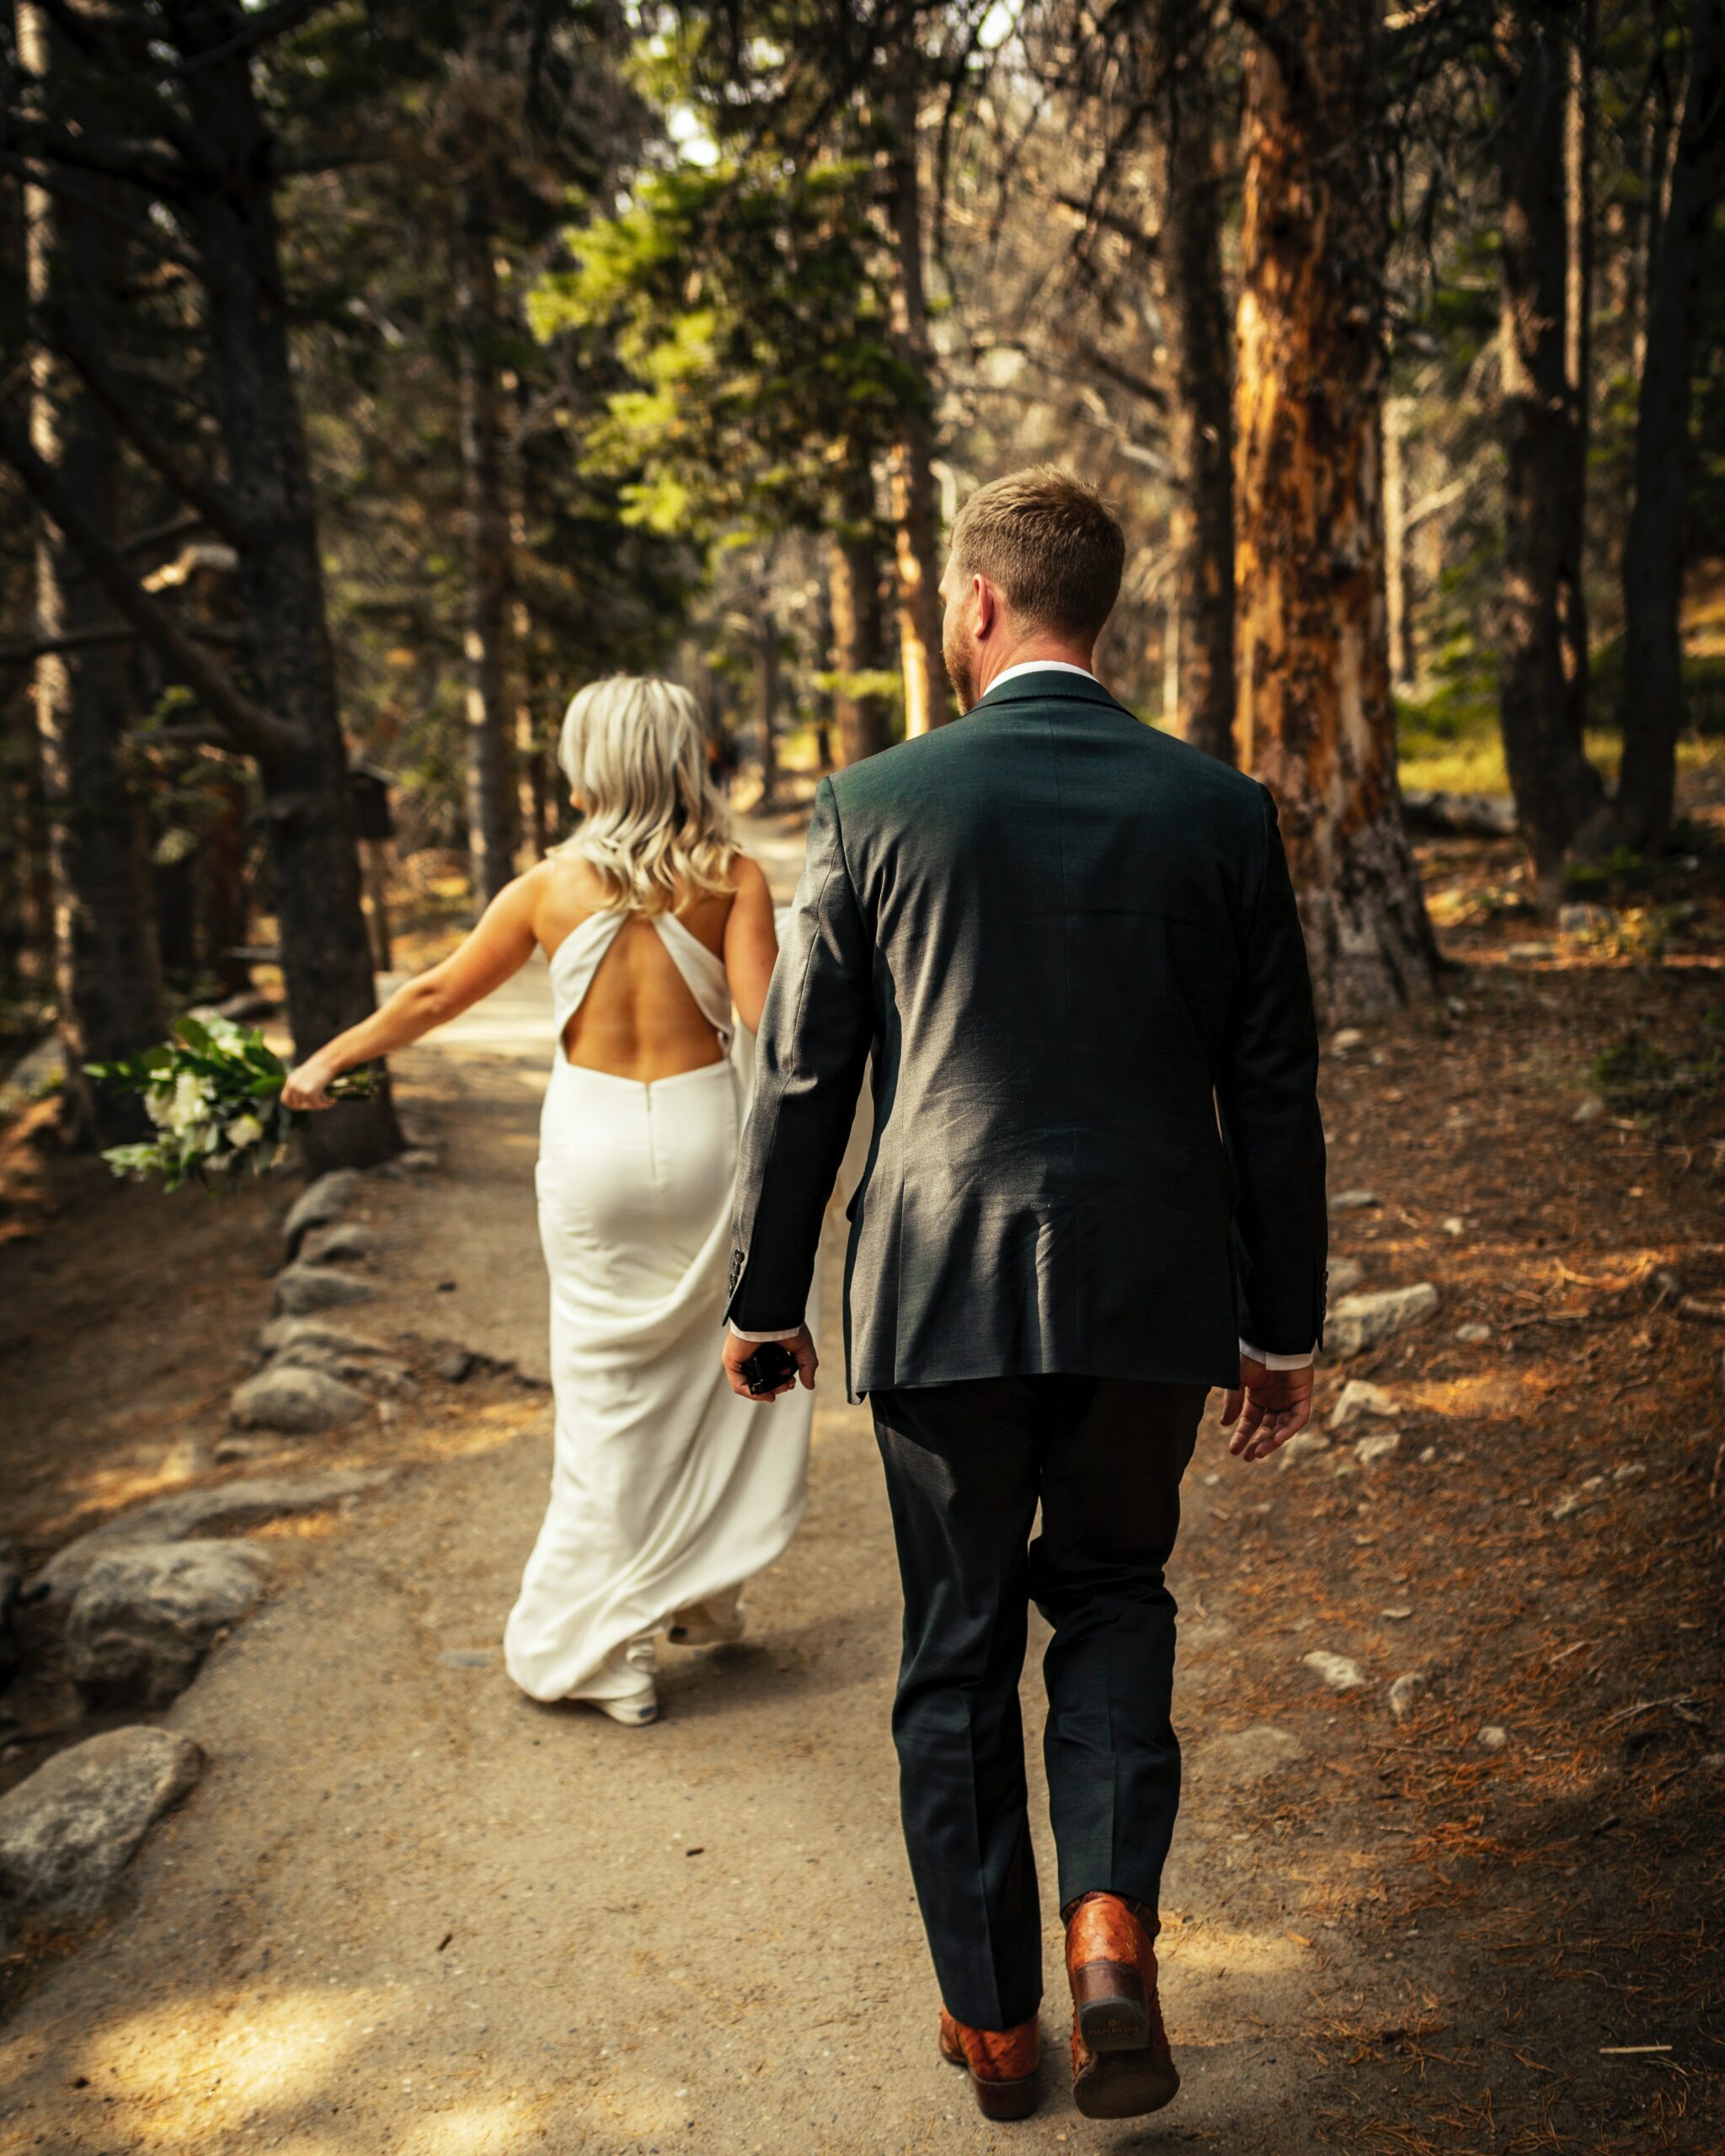 A man donning a black suit and a lady in a white gown wander through the forest, appreciating nature's beauty.